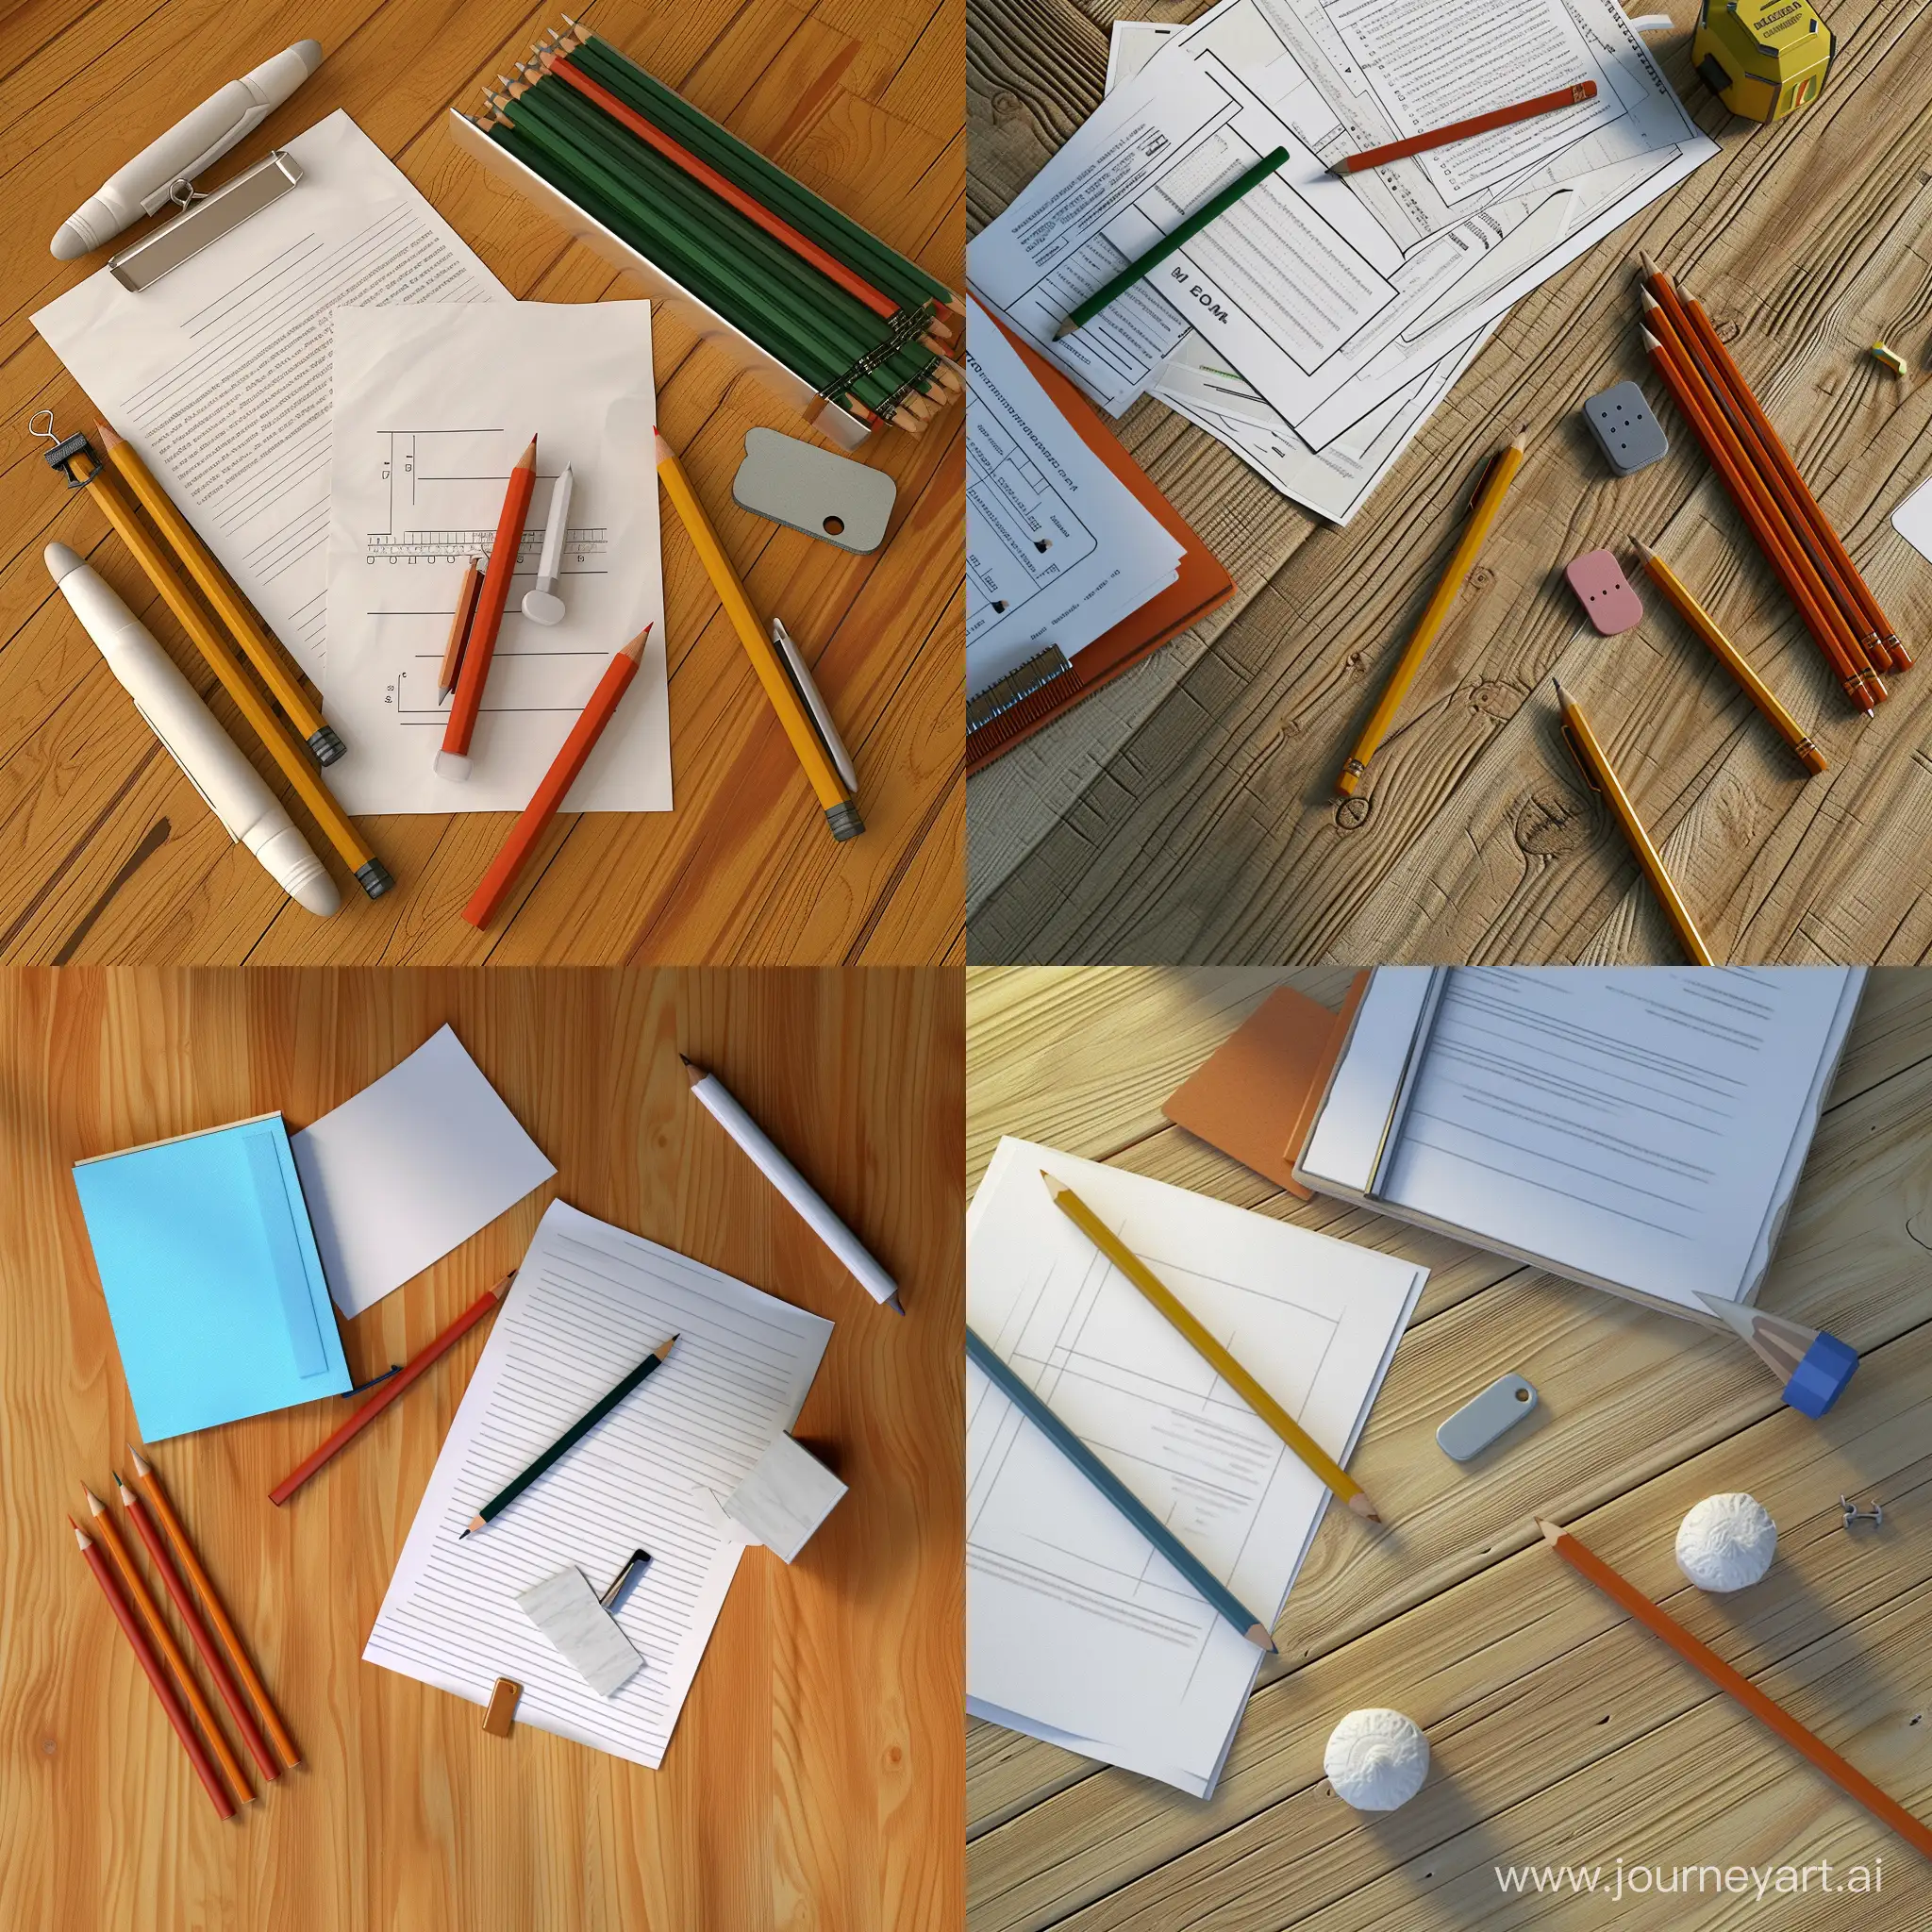 Artistic-Workspace-Stylized-Table-with-Pens-Pencils-and-Papers